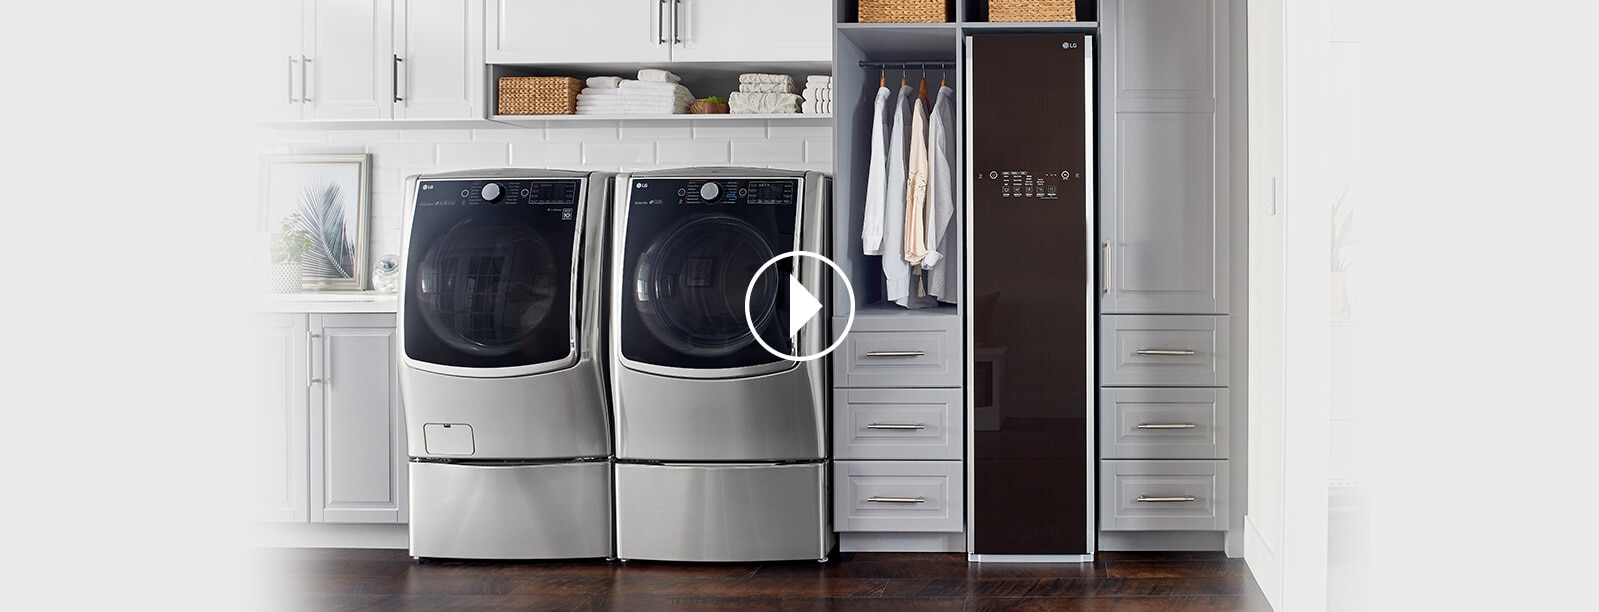 Washer & Dryer Pedestal | Made in The USA | This Is The Ultimate Solution for Laundry Room Organization | Designed for All Appliances & Popular